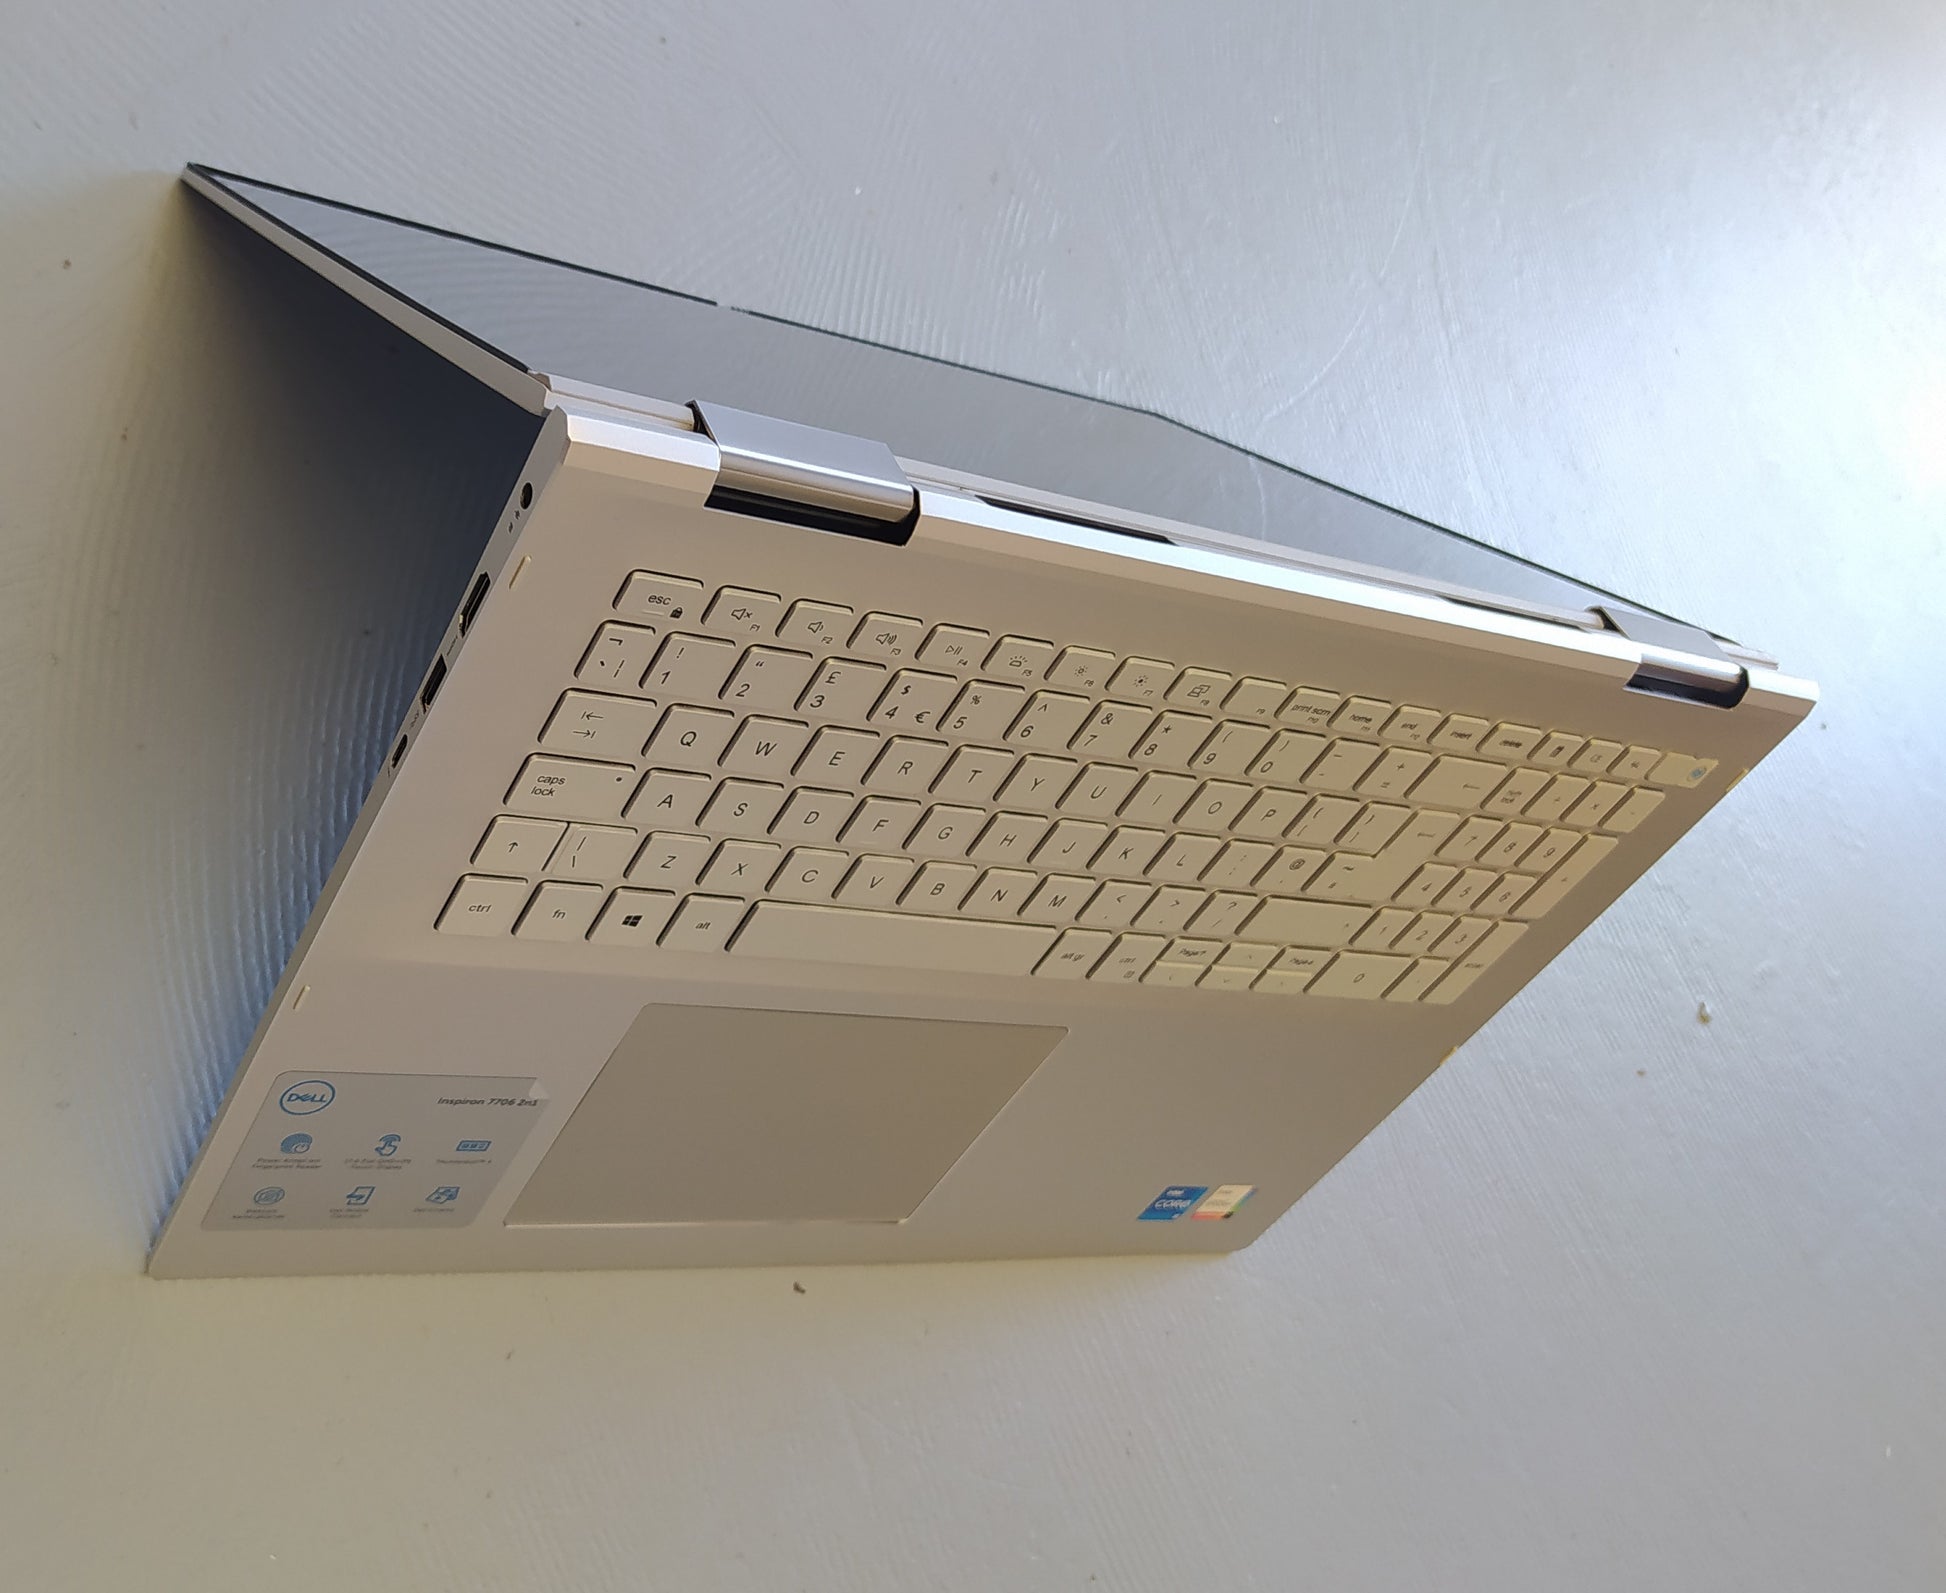 Tent mode of the Dell Inspiron 7706 - A platinum silver 2in1 laptop with 17 Inch screen and native 2560 x 1600 Resolution. Featuring Windows 11 and an 11th gen intel processor. Connect easily via USB-C (Thunderbolt), USB 3.2 and HDMI. Hosting a GeForce MX350 Graphics Card. 77061165G716GB512SSDMX350